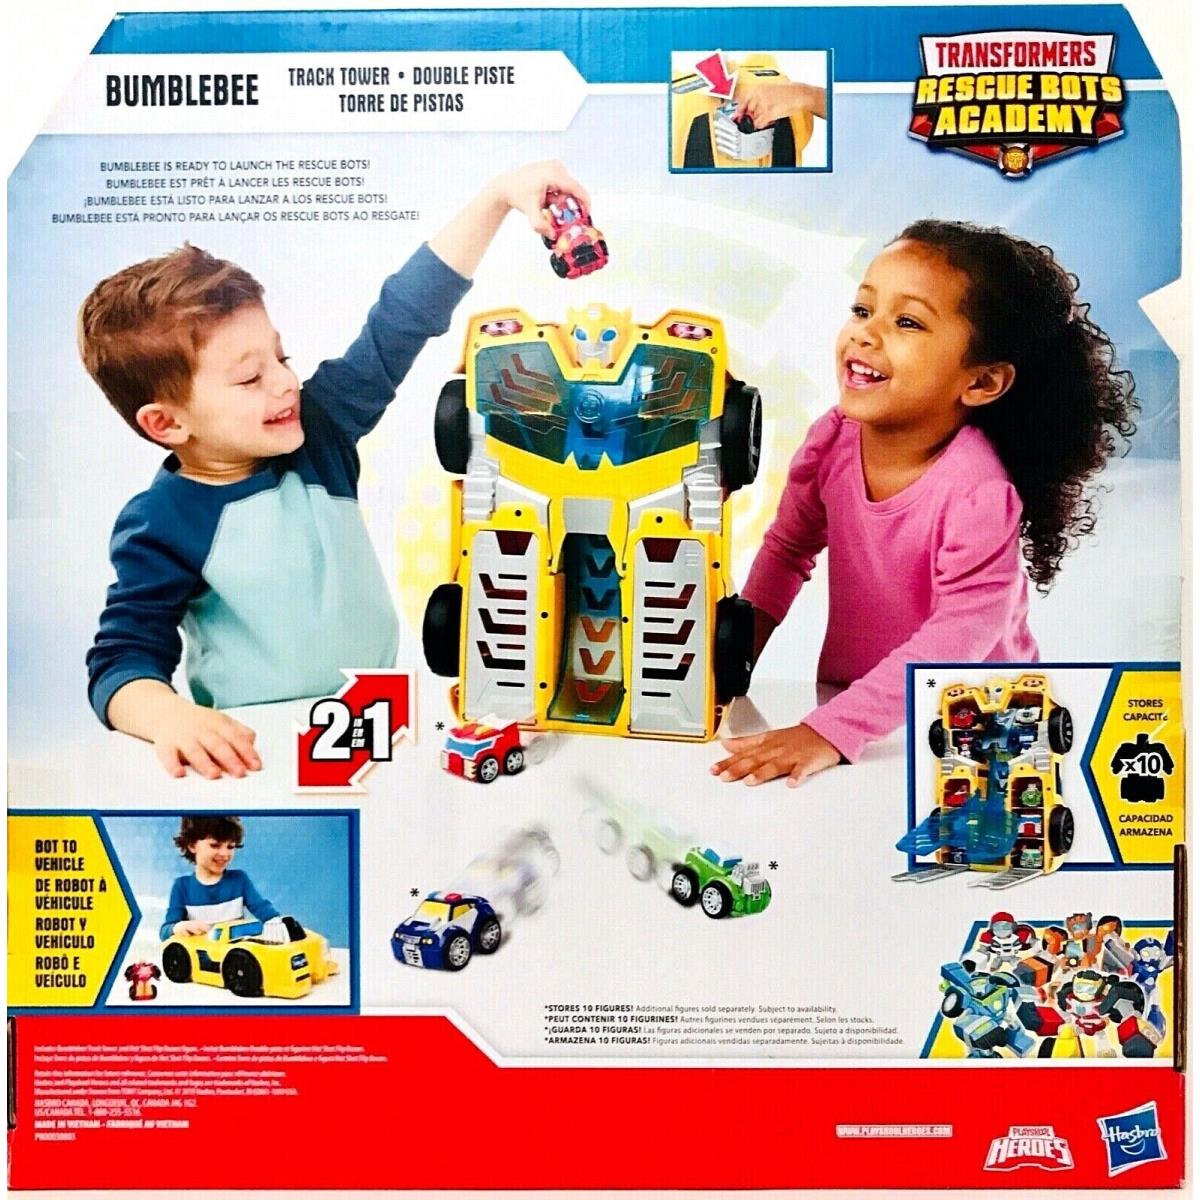 Hasbro Transformers Rescue Bots Academy Bumblebee 2 In 1 Track Tower Age 3 Up